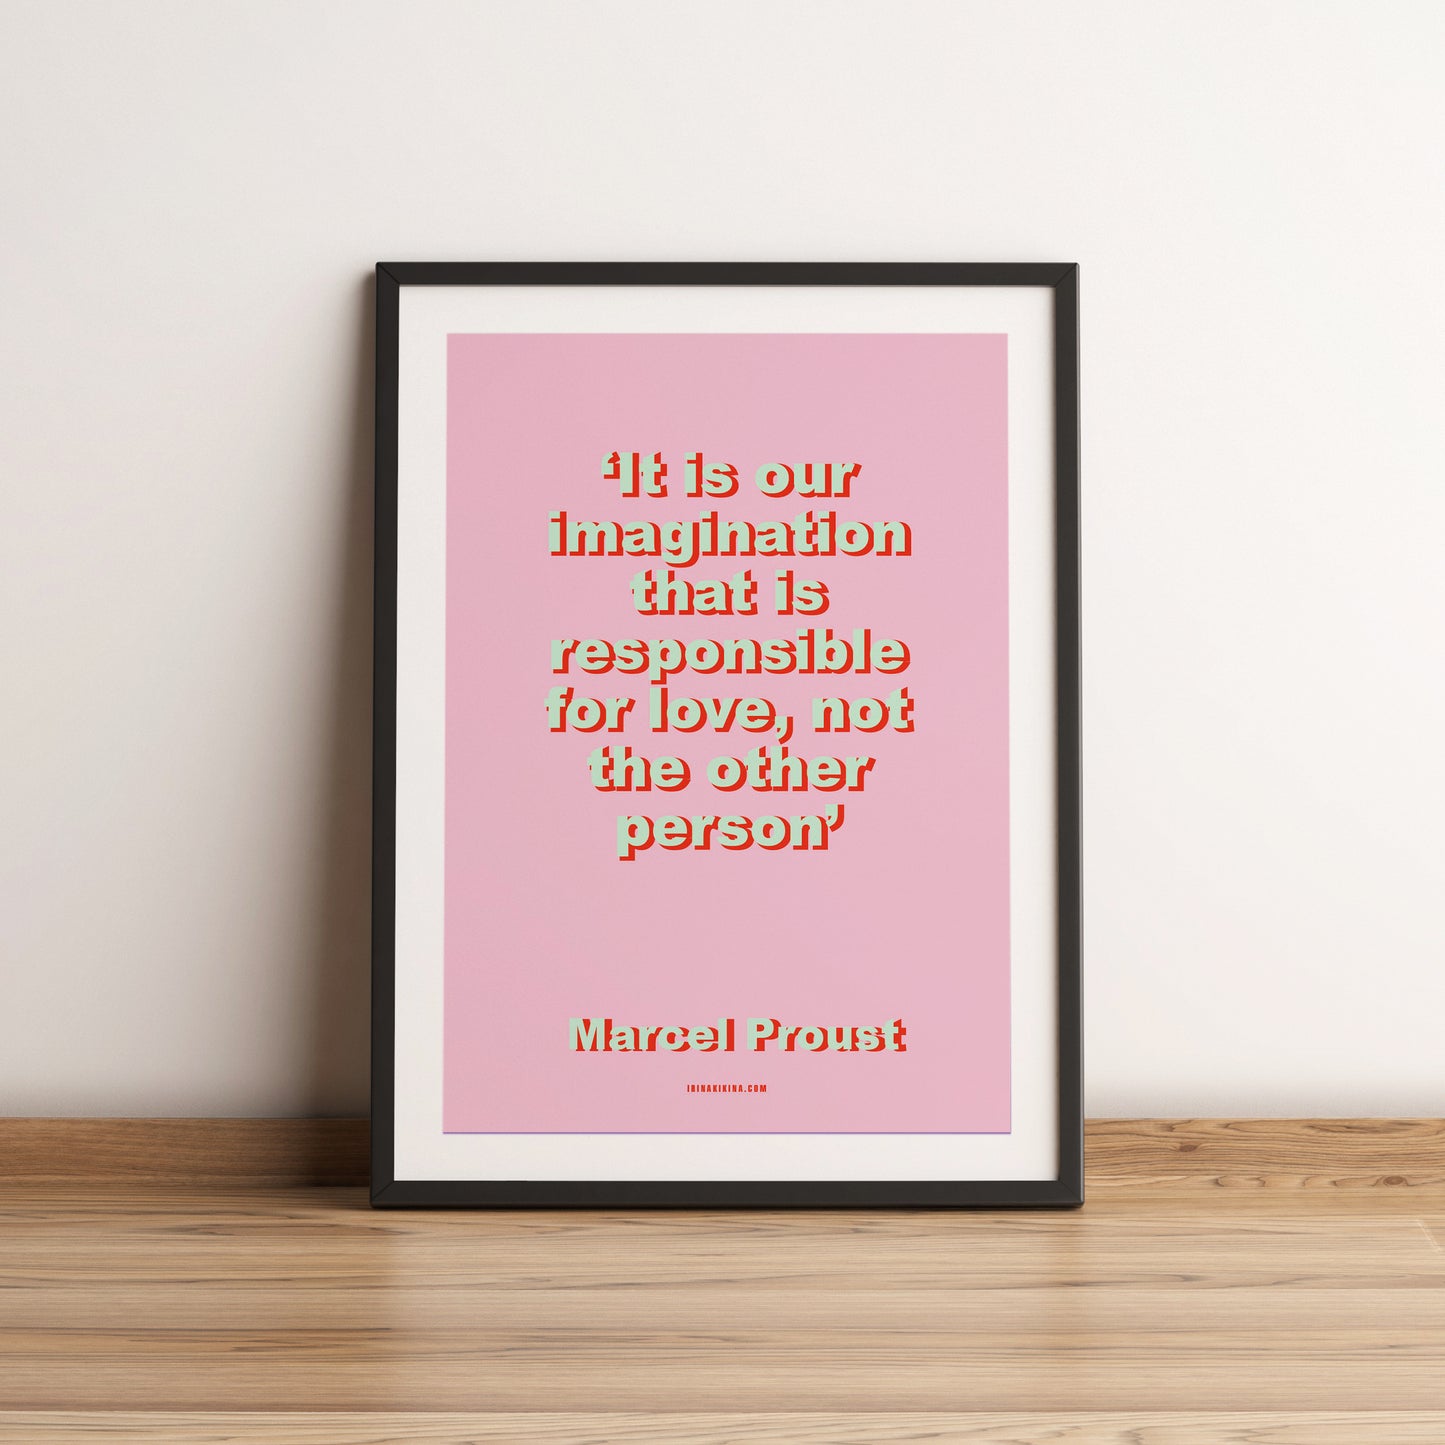 Our Imagination that is Responsible For Love. Marcel Proust Quote Artwork. A4 Poster.